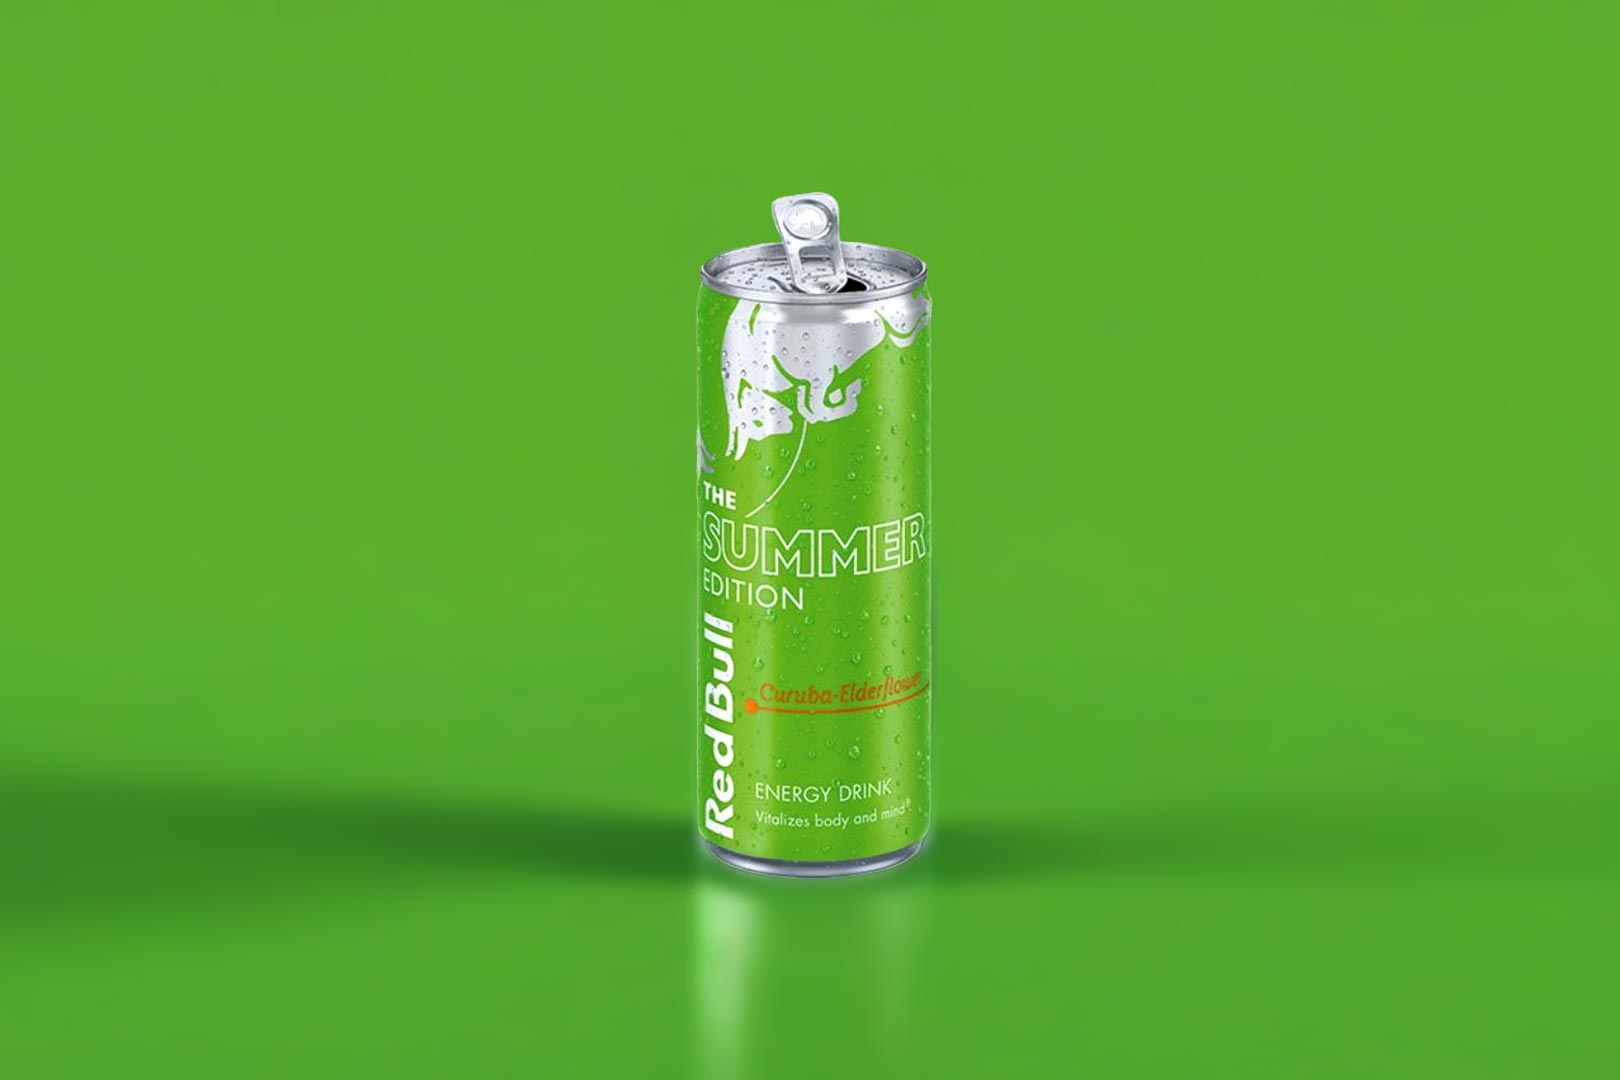 Red Bull uniquely blends curuba and elderflower for its latest Summer Edition flavor